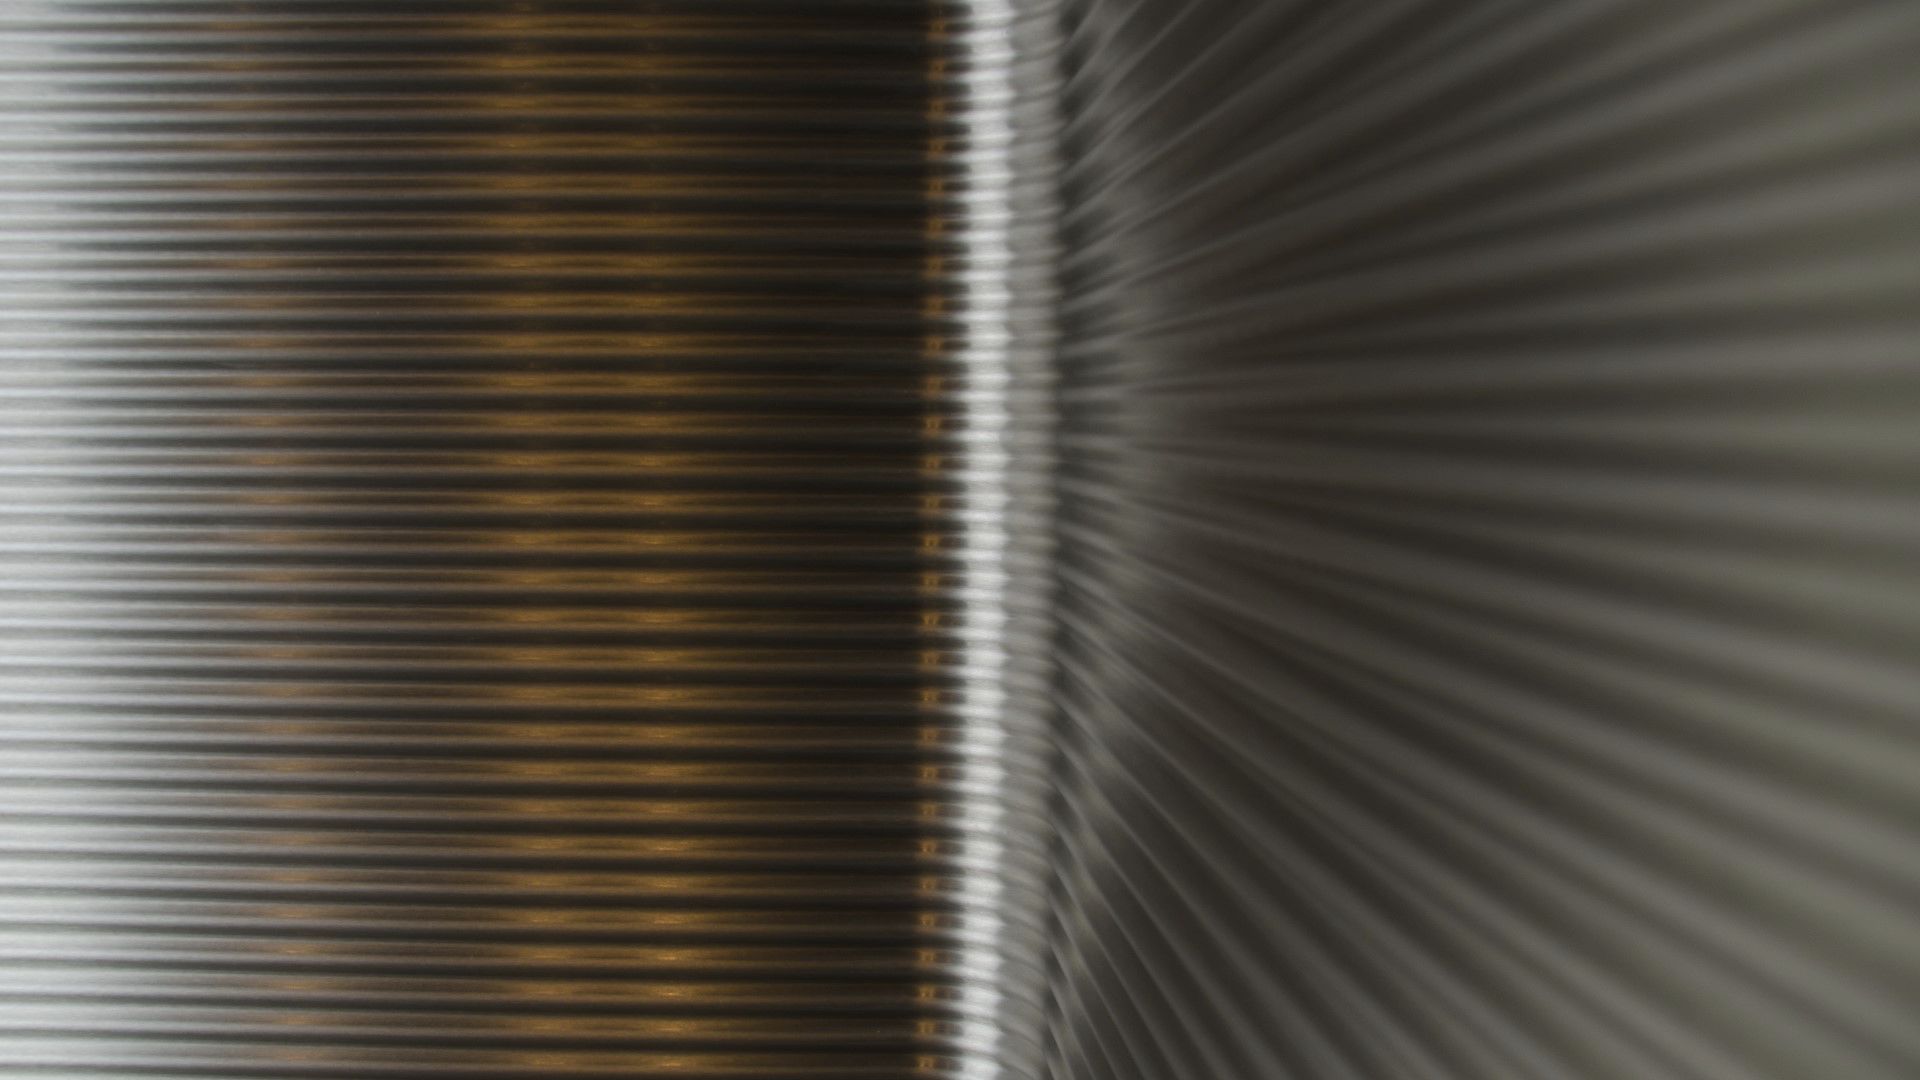 Corrugated Metal Sheet / Stainless Steel / For Interior - Architecture , HD Wallpaper & Backgrounds